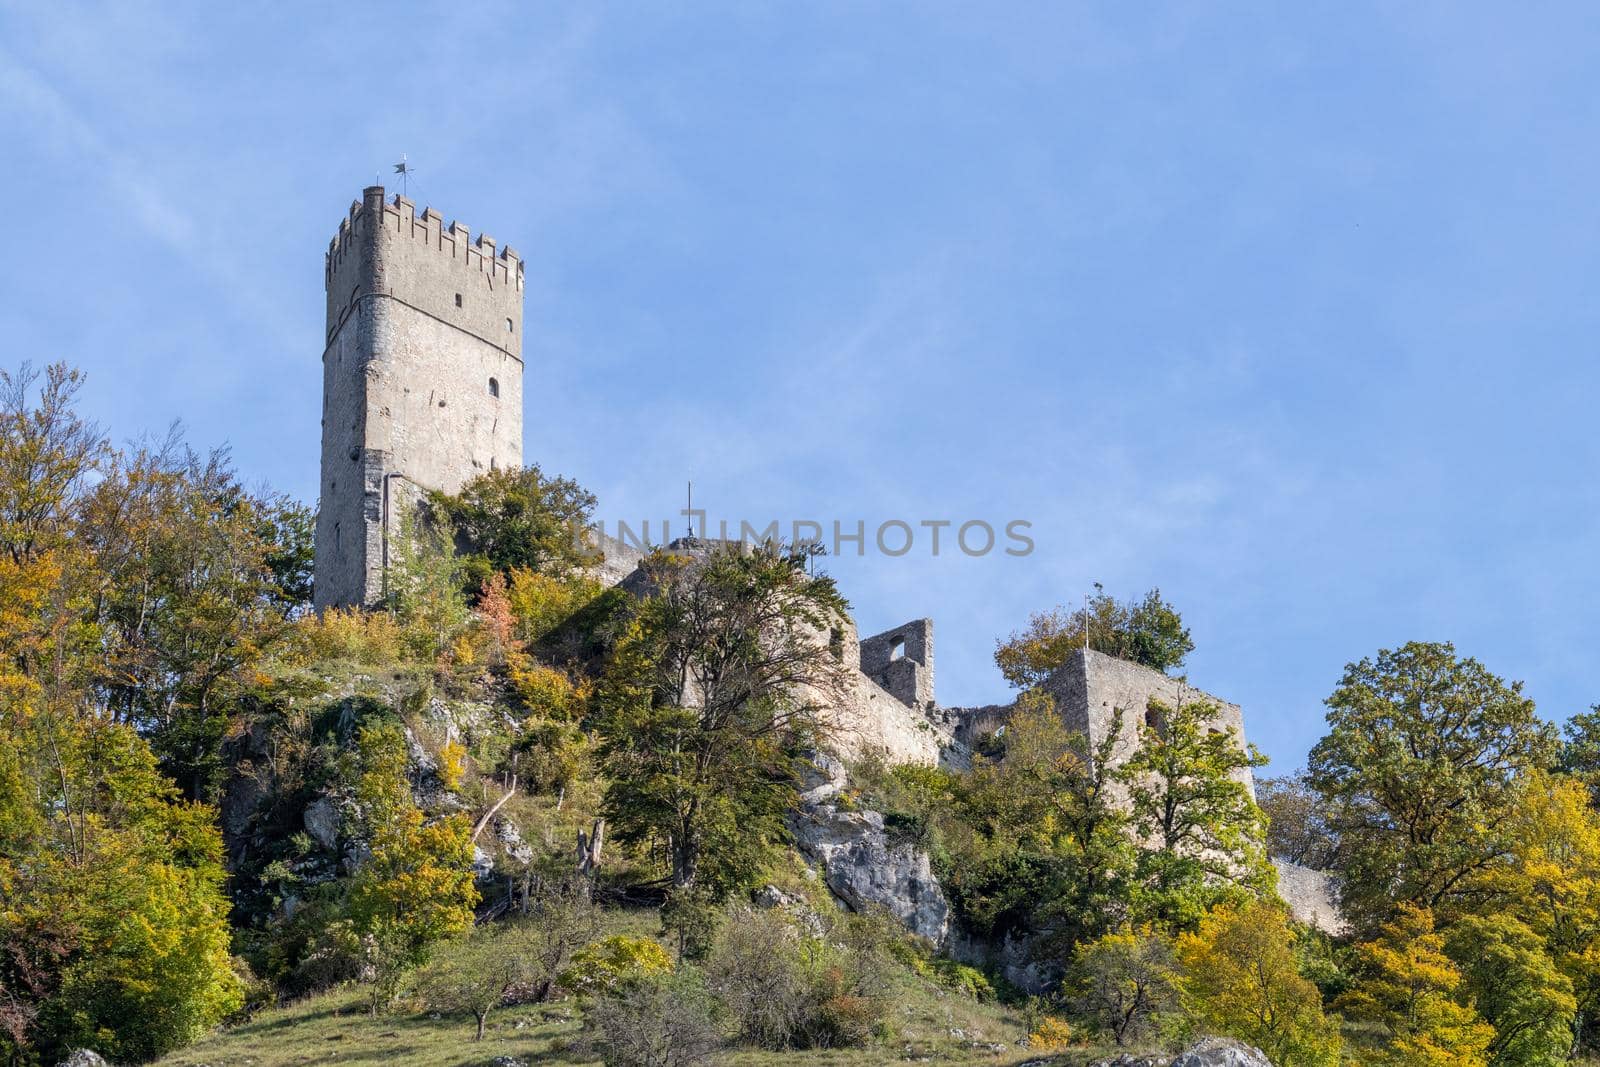 The ruin of Randeck castle in Markt Essing, Bavaria, Germany in autumn with multi colored trees by reinerc